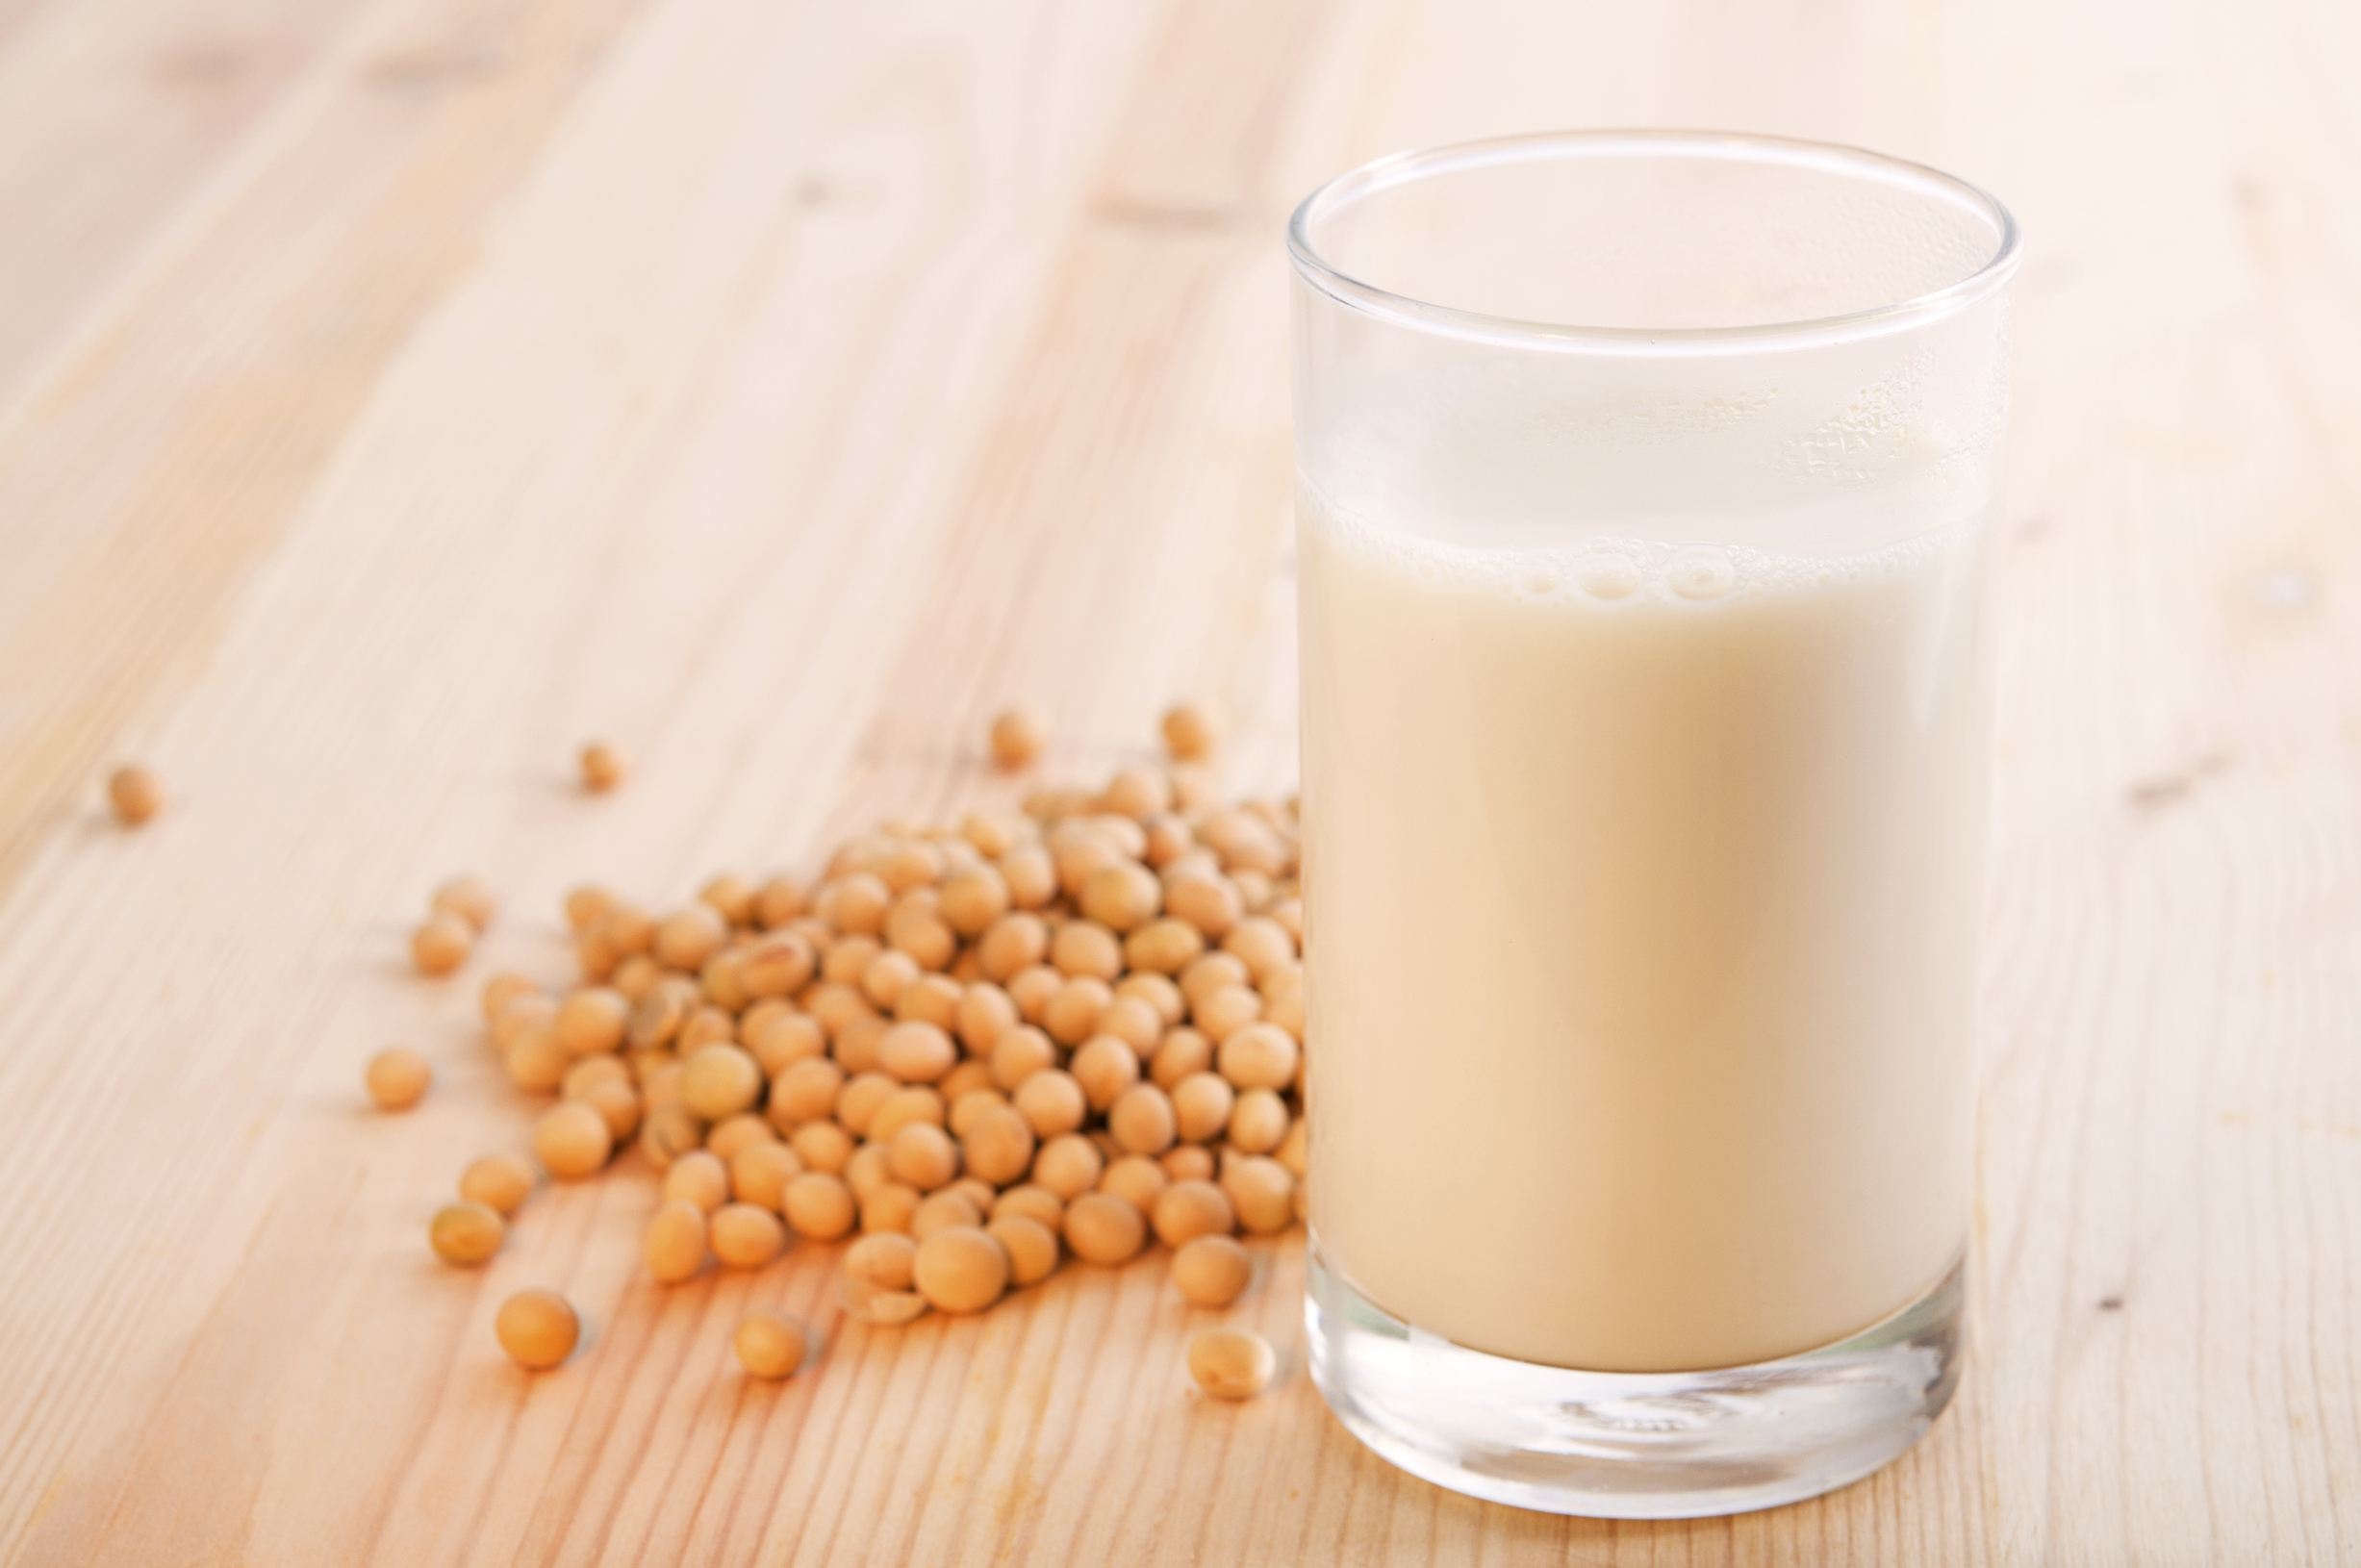 is drinking a lot of soy milk bad for you